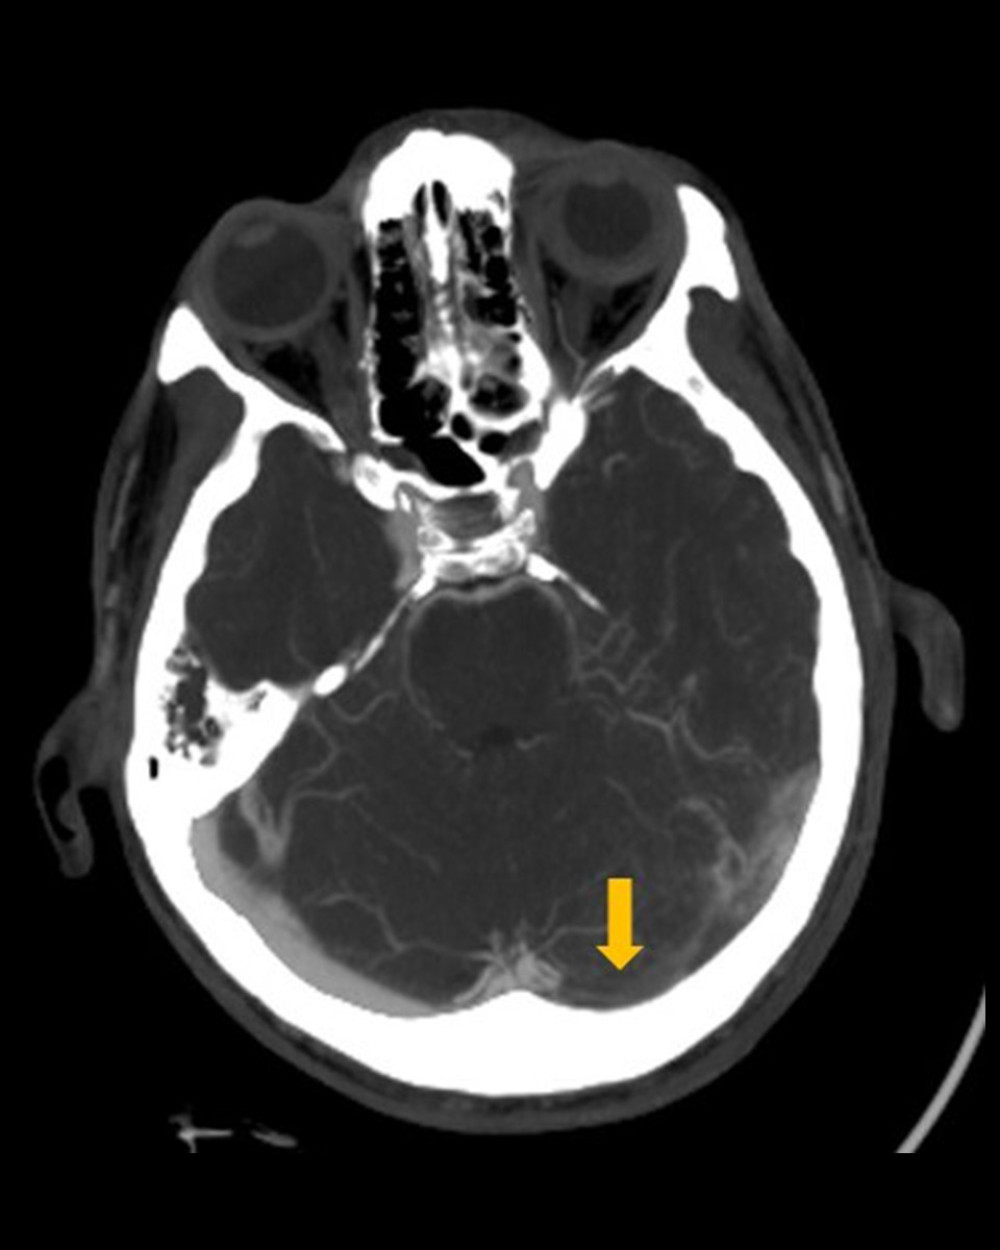 Computed tomography venography of the brain revealed an absence of flow at the level of the left transverse sinus, while showing preserved flow on the right transverse sinus.